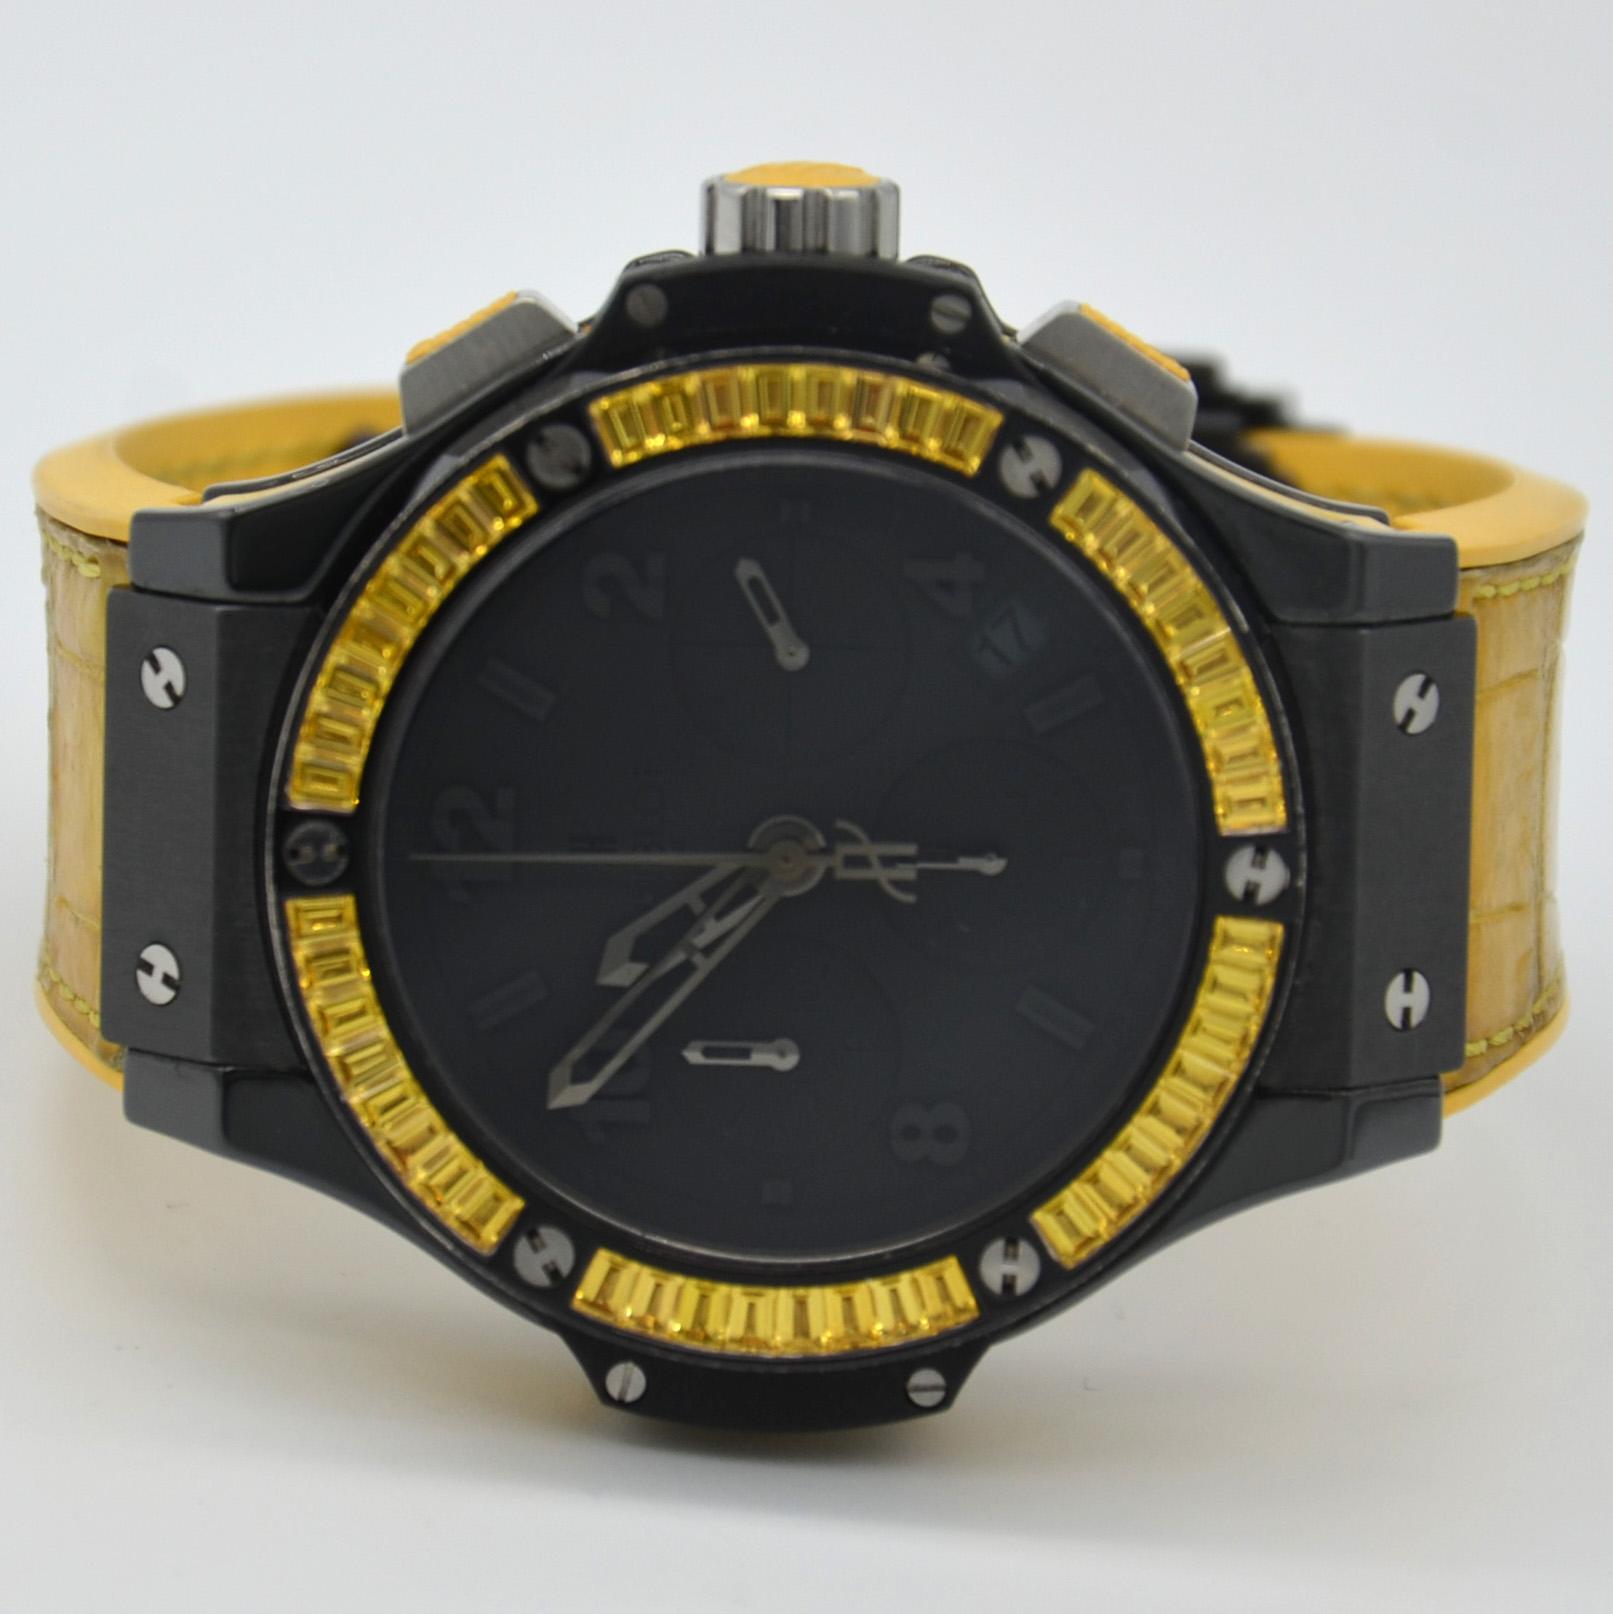 41mm black ceramic case, PVD white gold bezel set with 48 baguette yellow sapphires, matt black dial, self winding HUB 4300 movement with chronograph function, approximately 42 hours of power reserve, yellow rubber-alligator strap with deployant